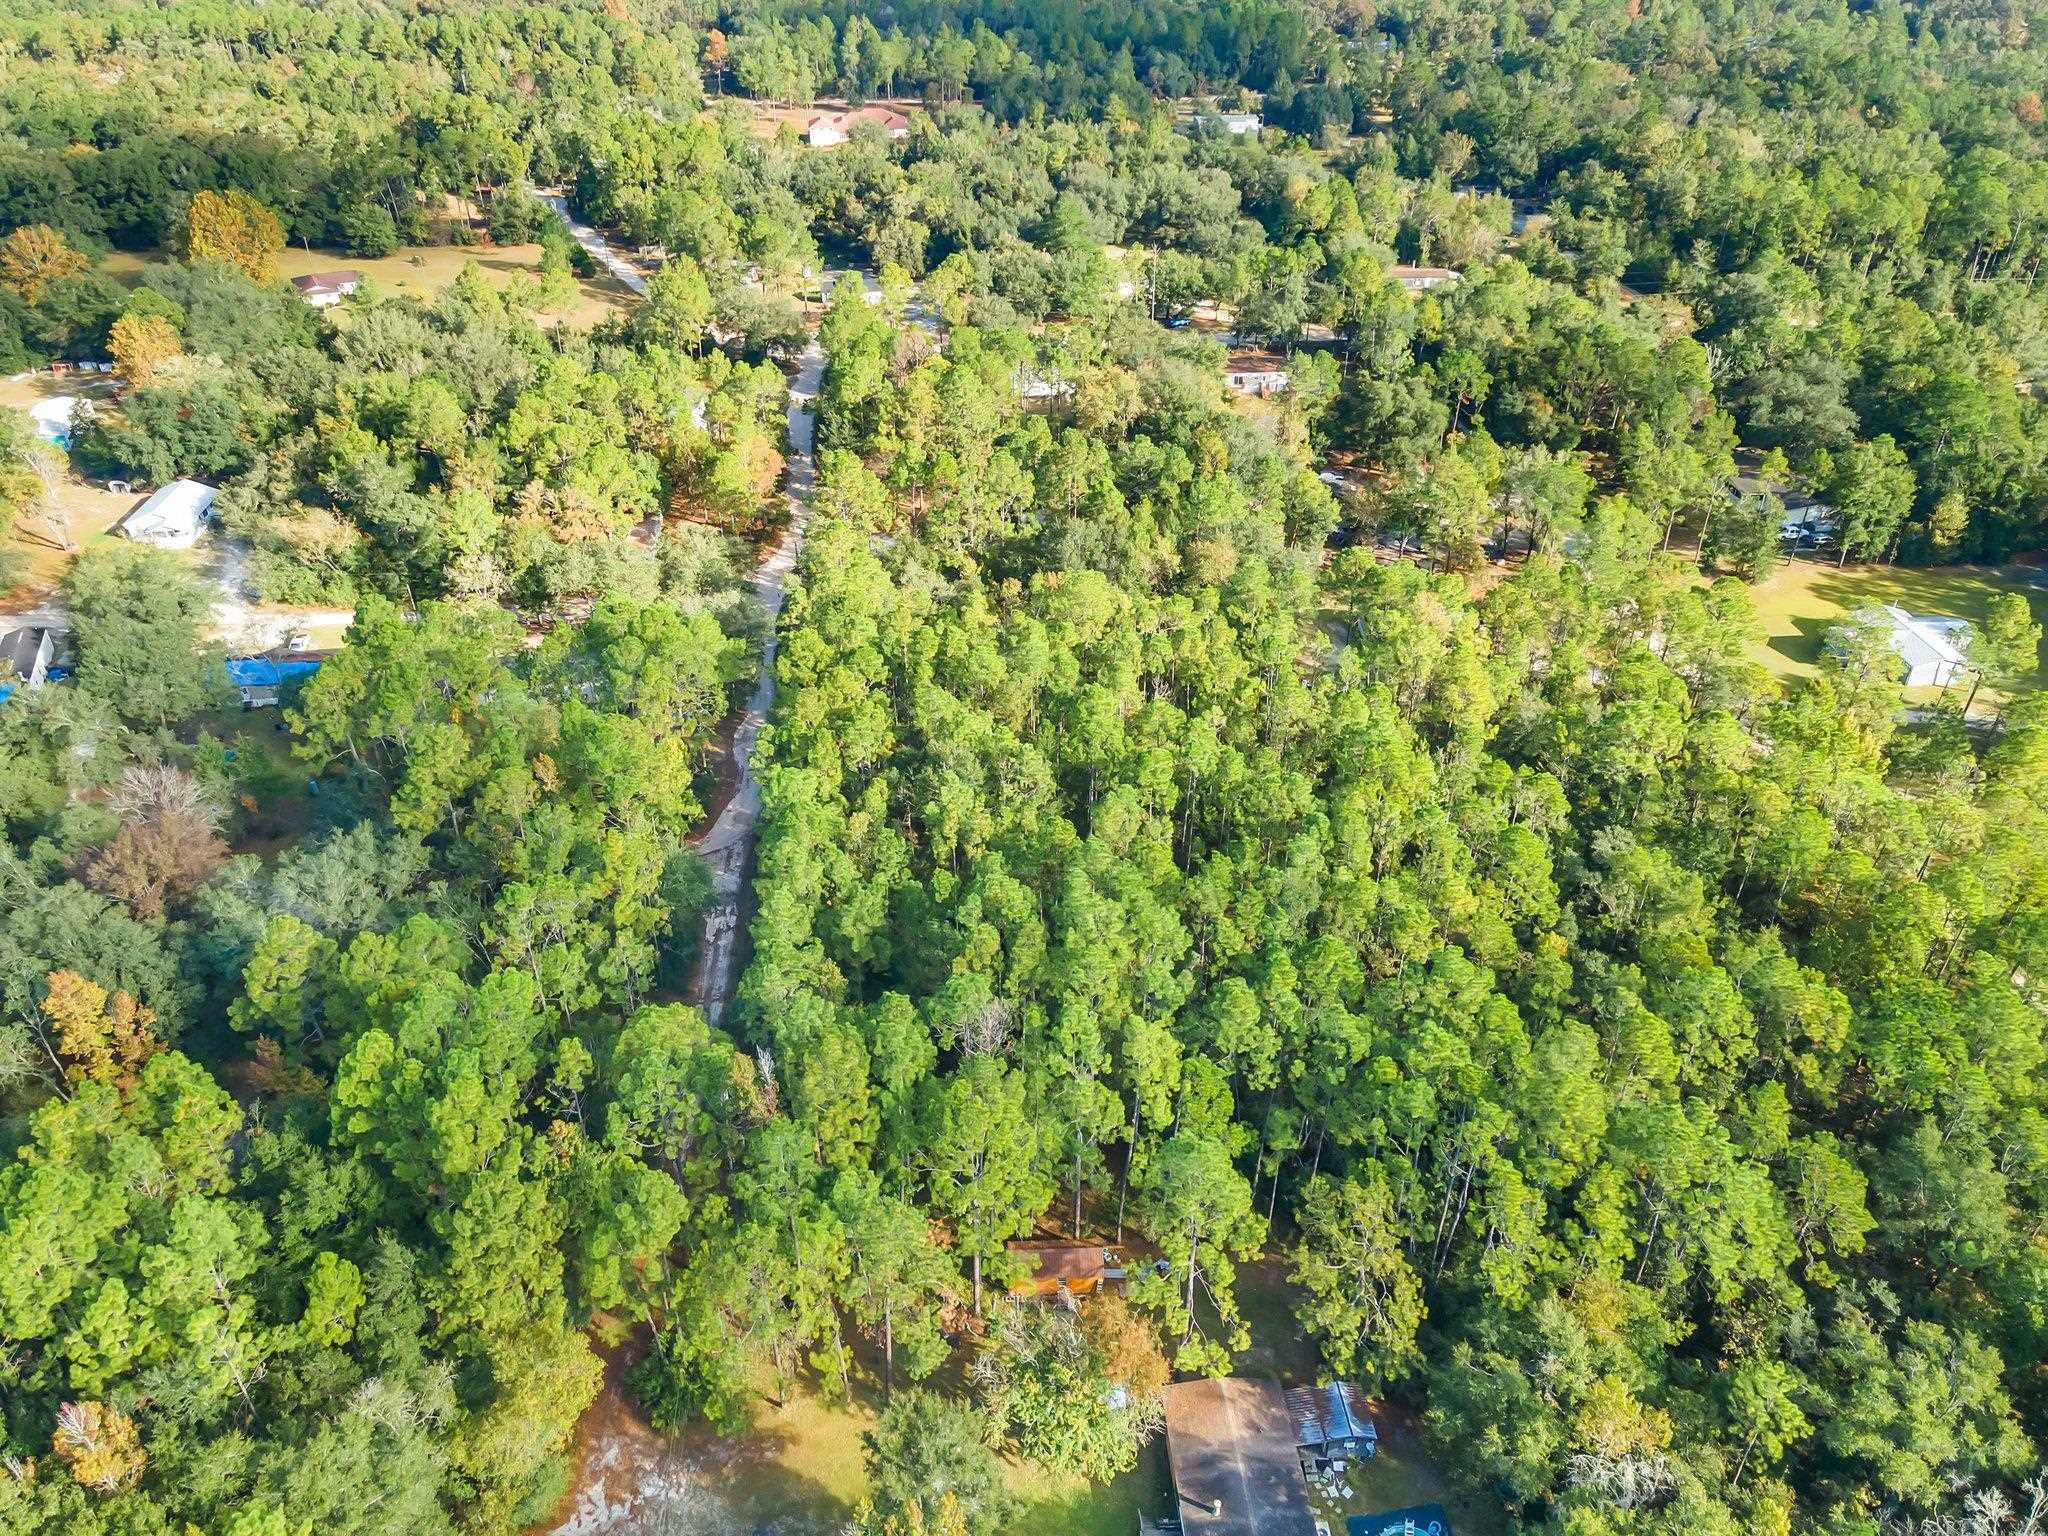 000 Wild Berry,TALLAHASSEE,Florida 32305,Lots and land,Wild Berry,368659